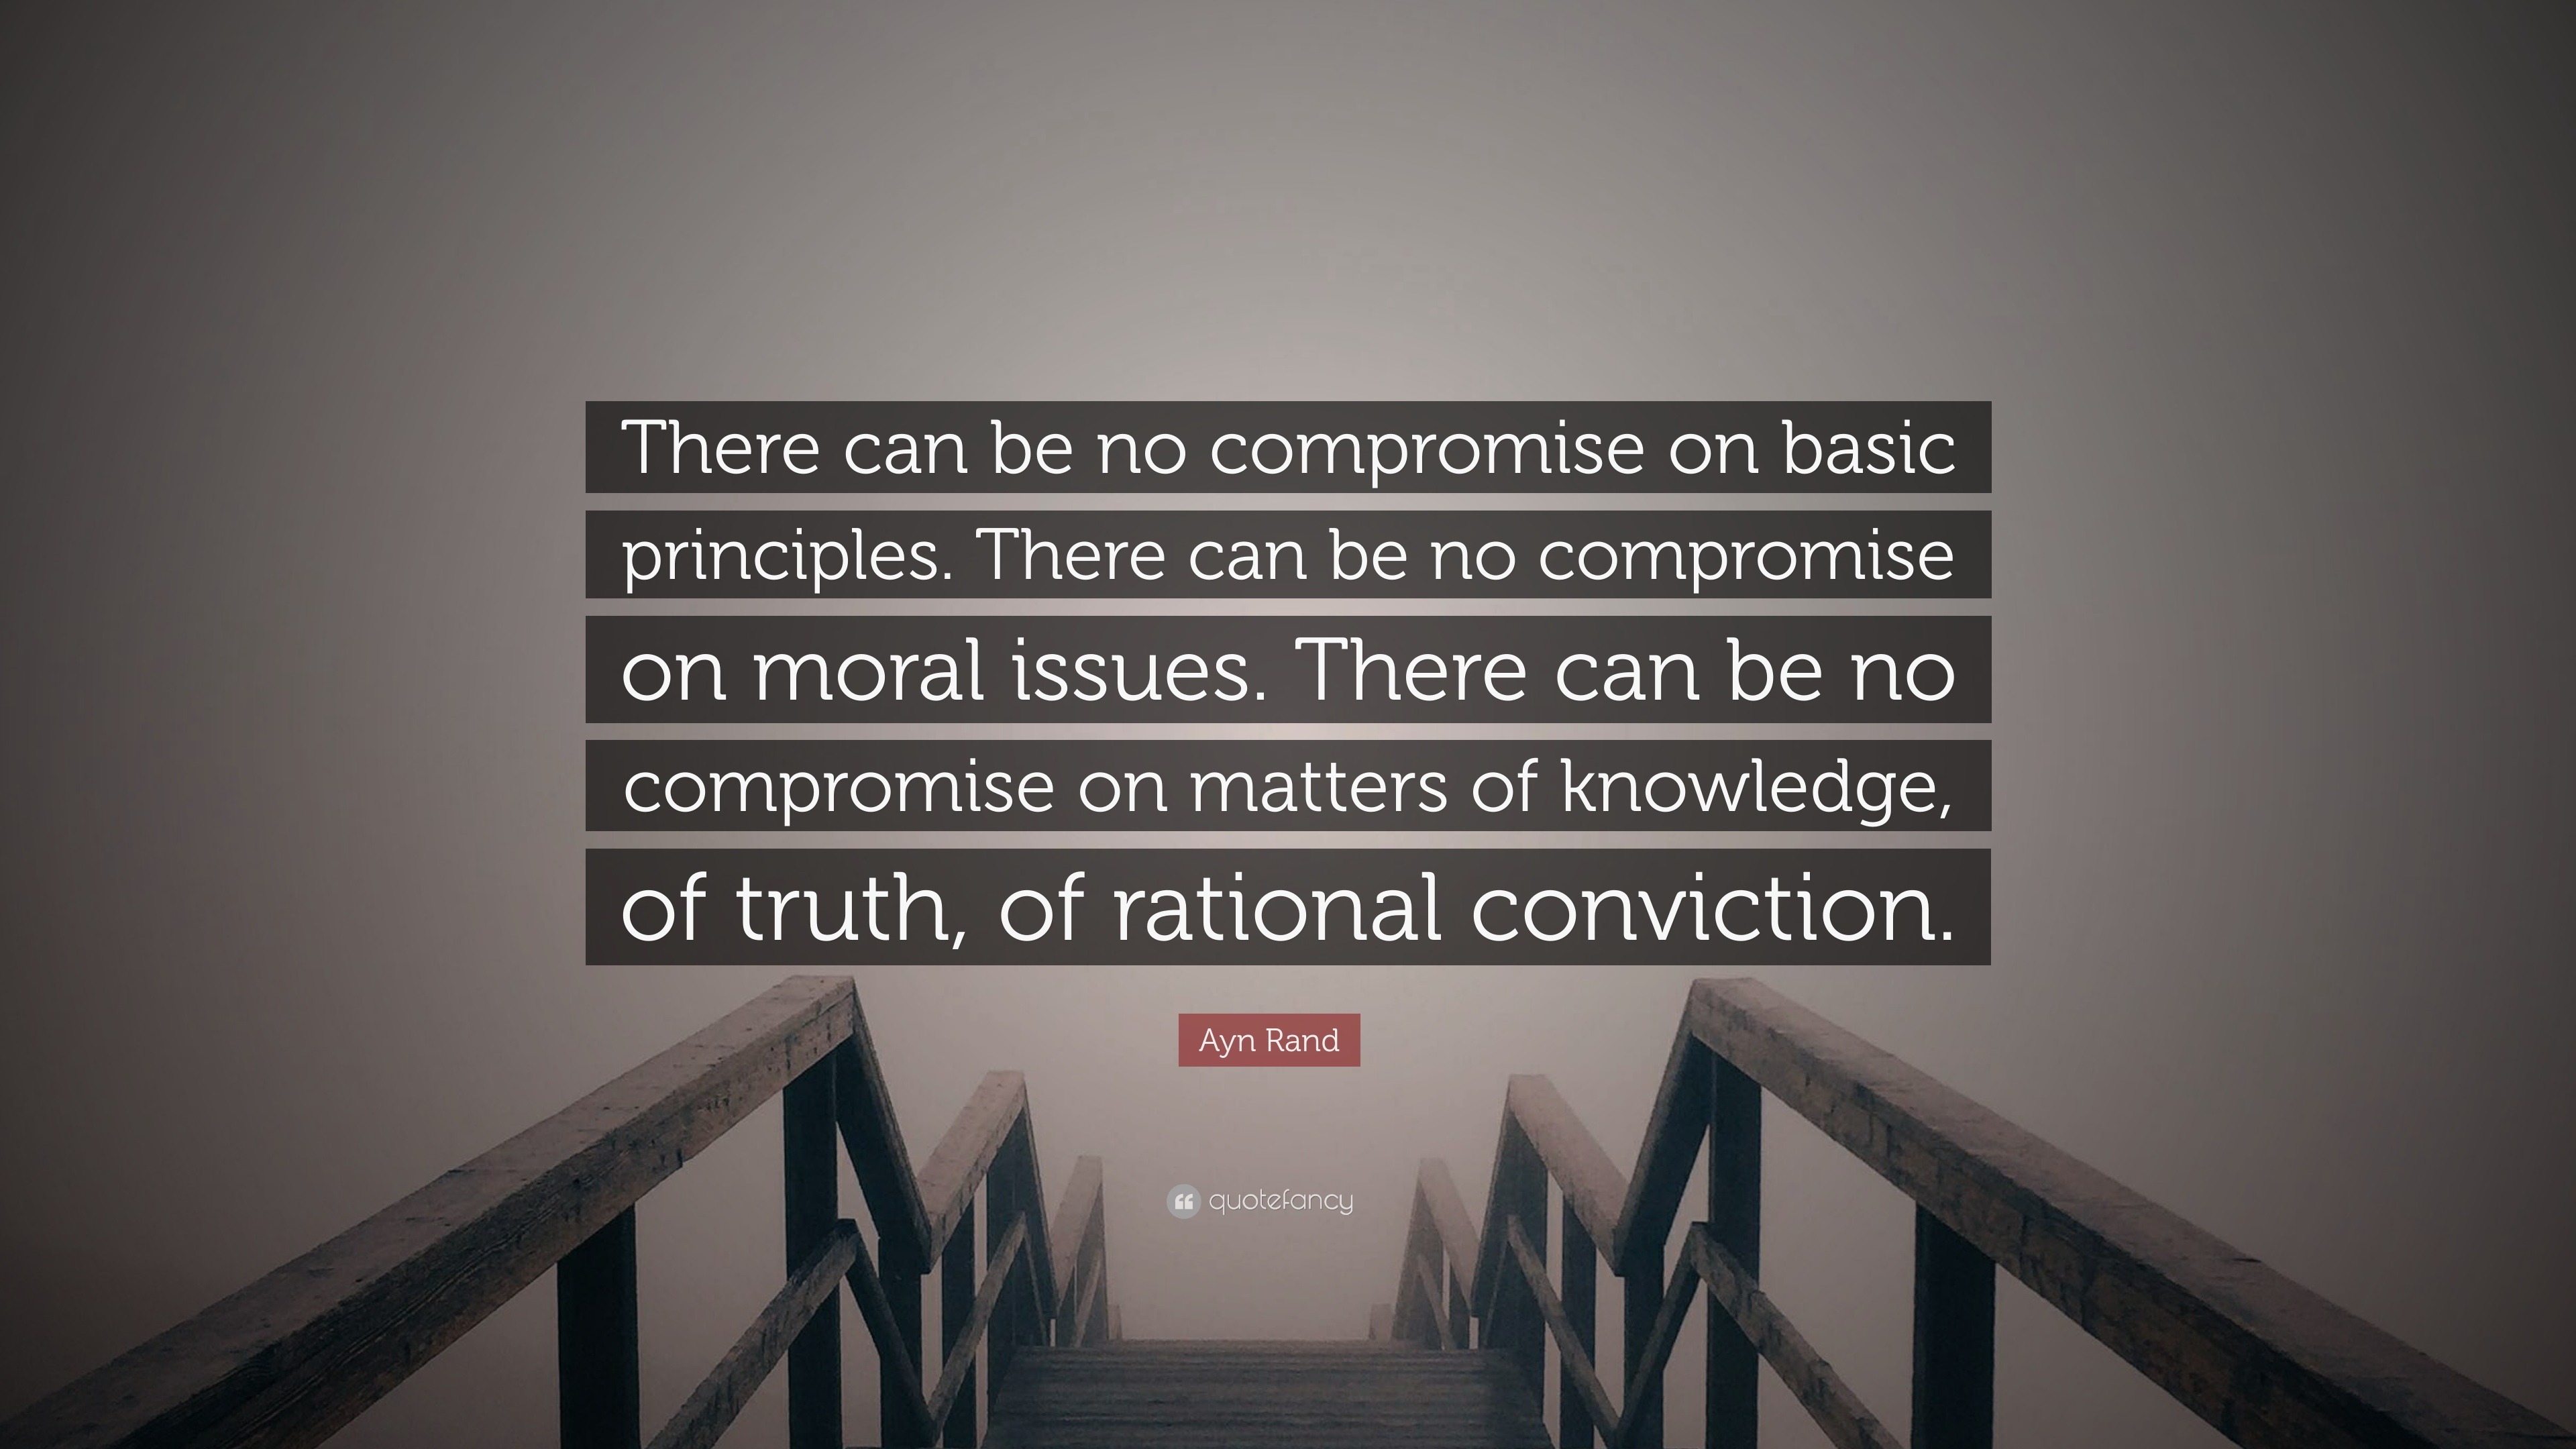 Ayn Rand Quote: “There can be no compromise on basic principles